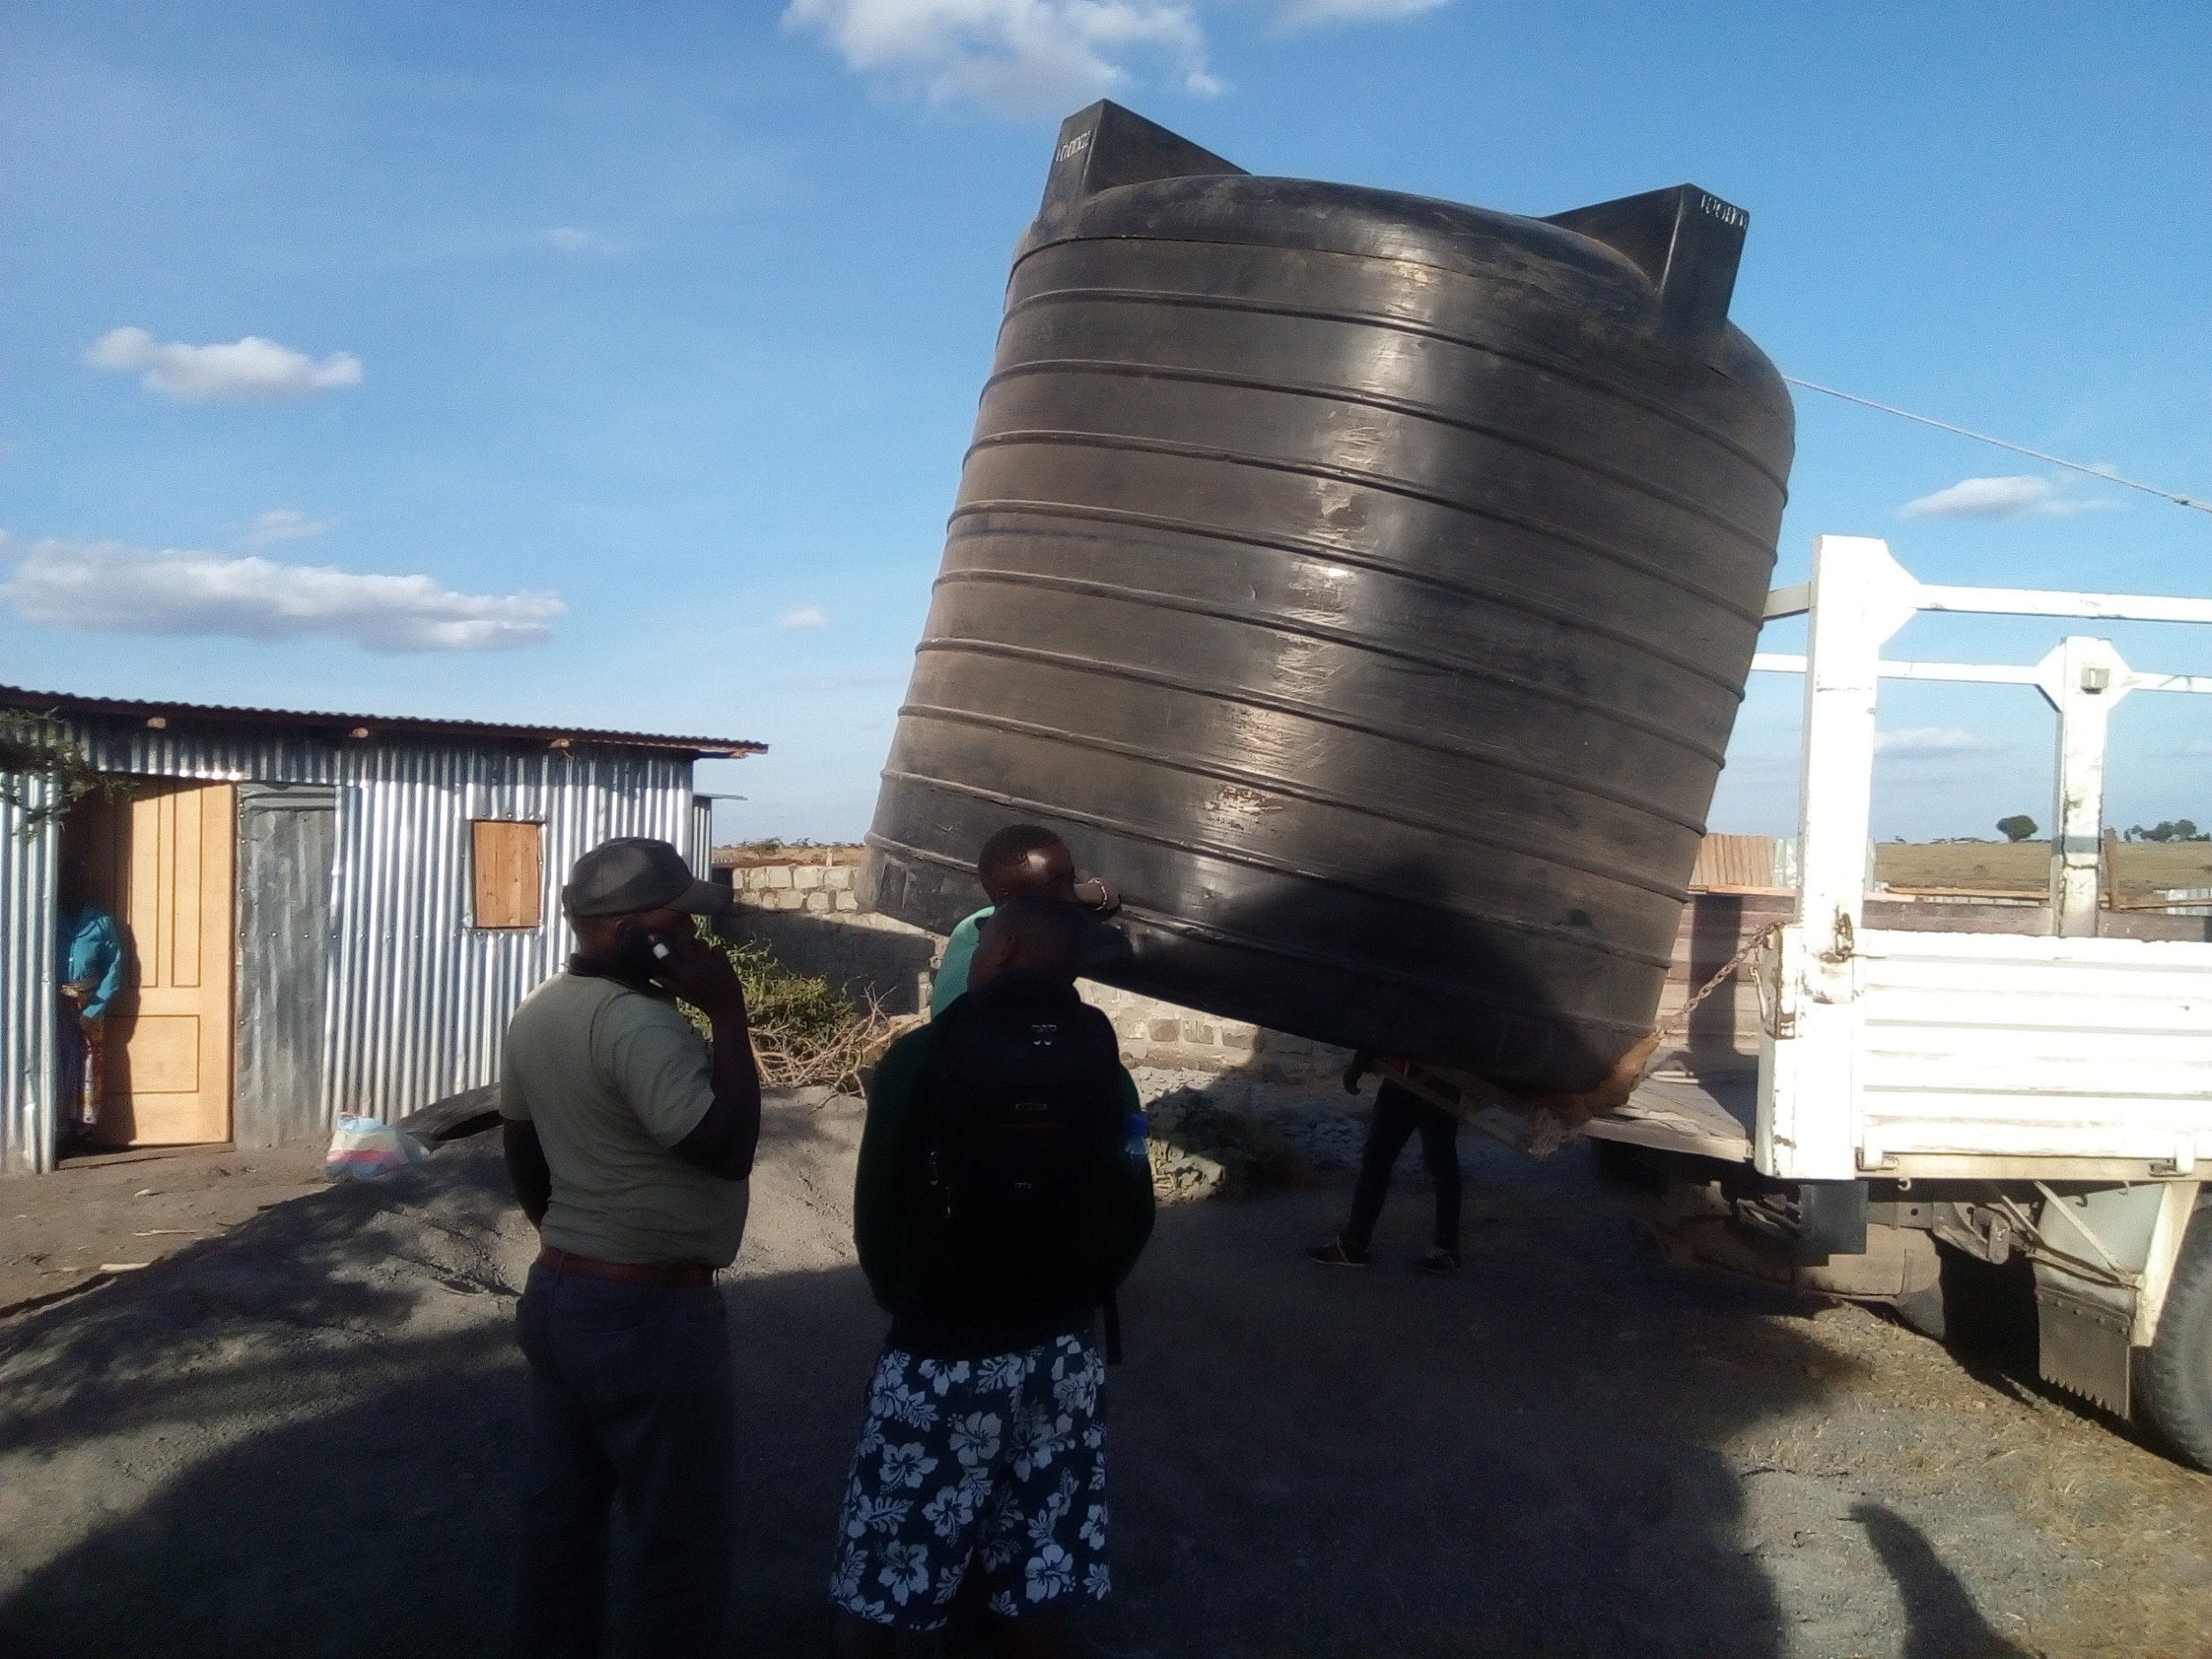 The water tank arrives!